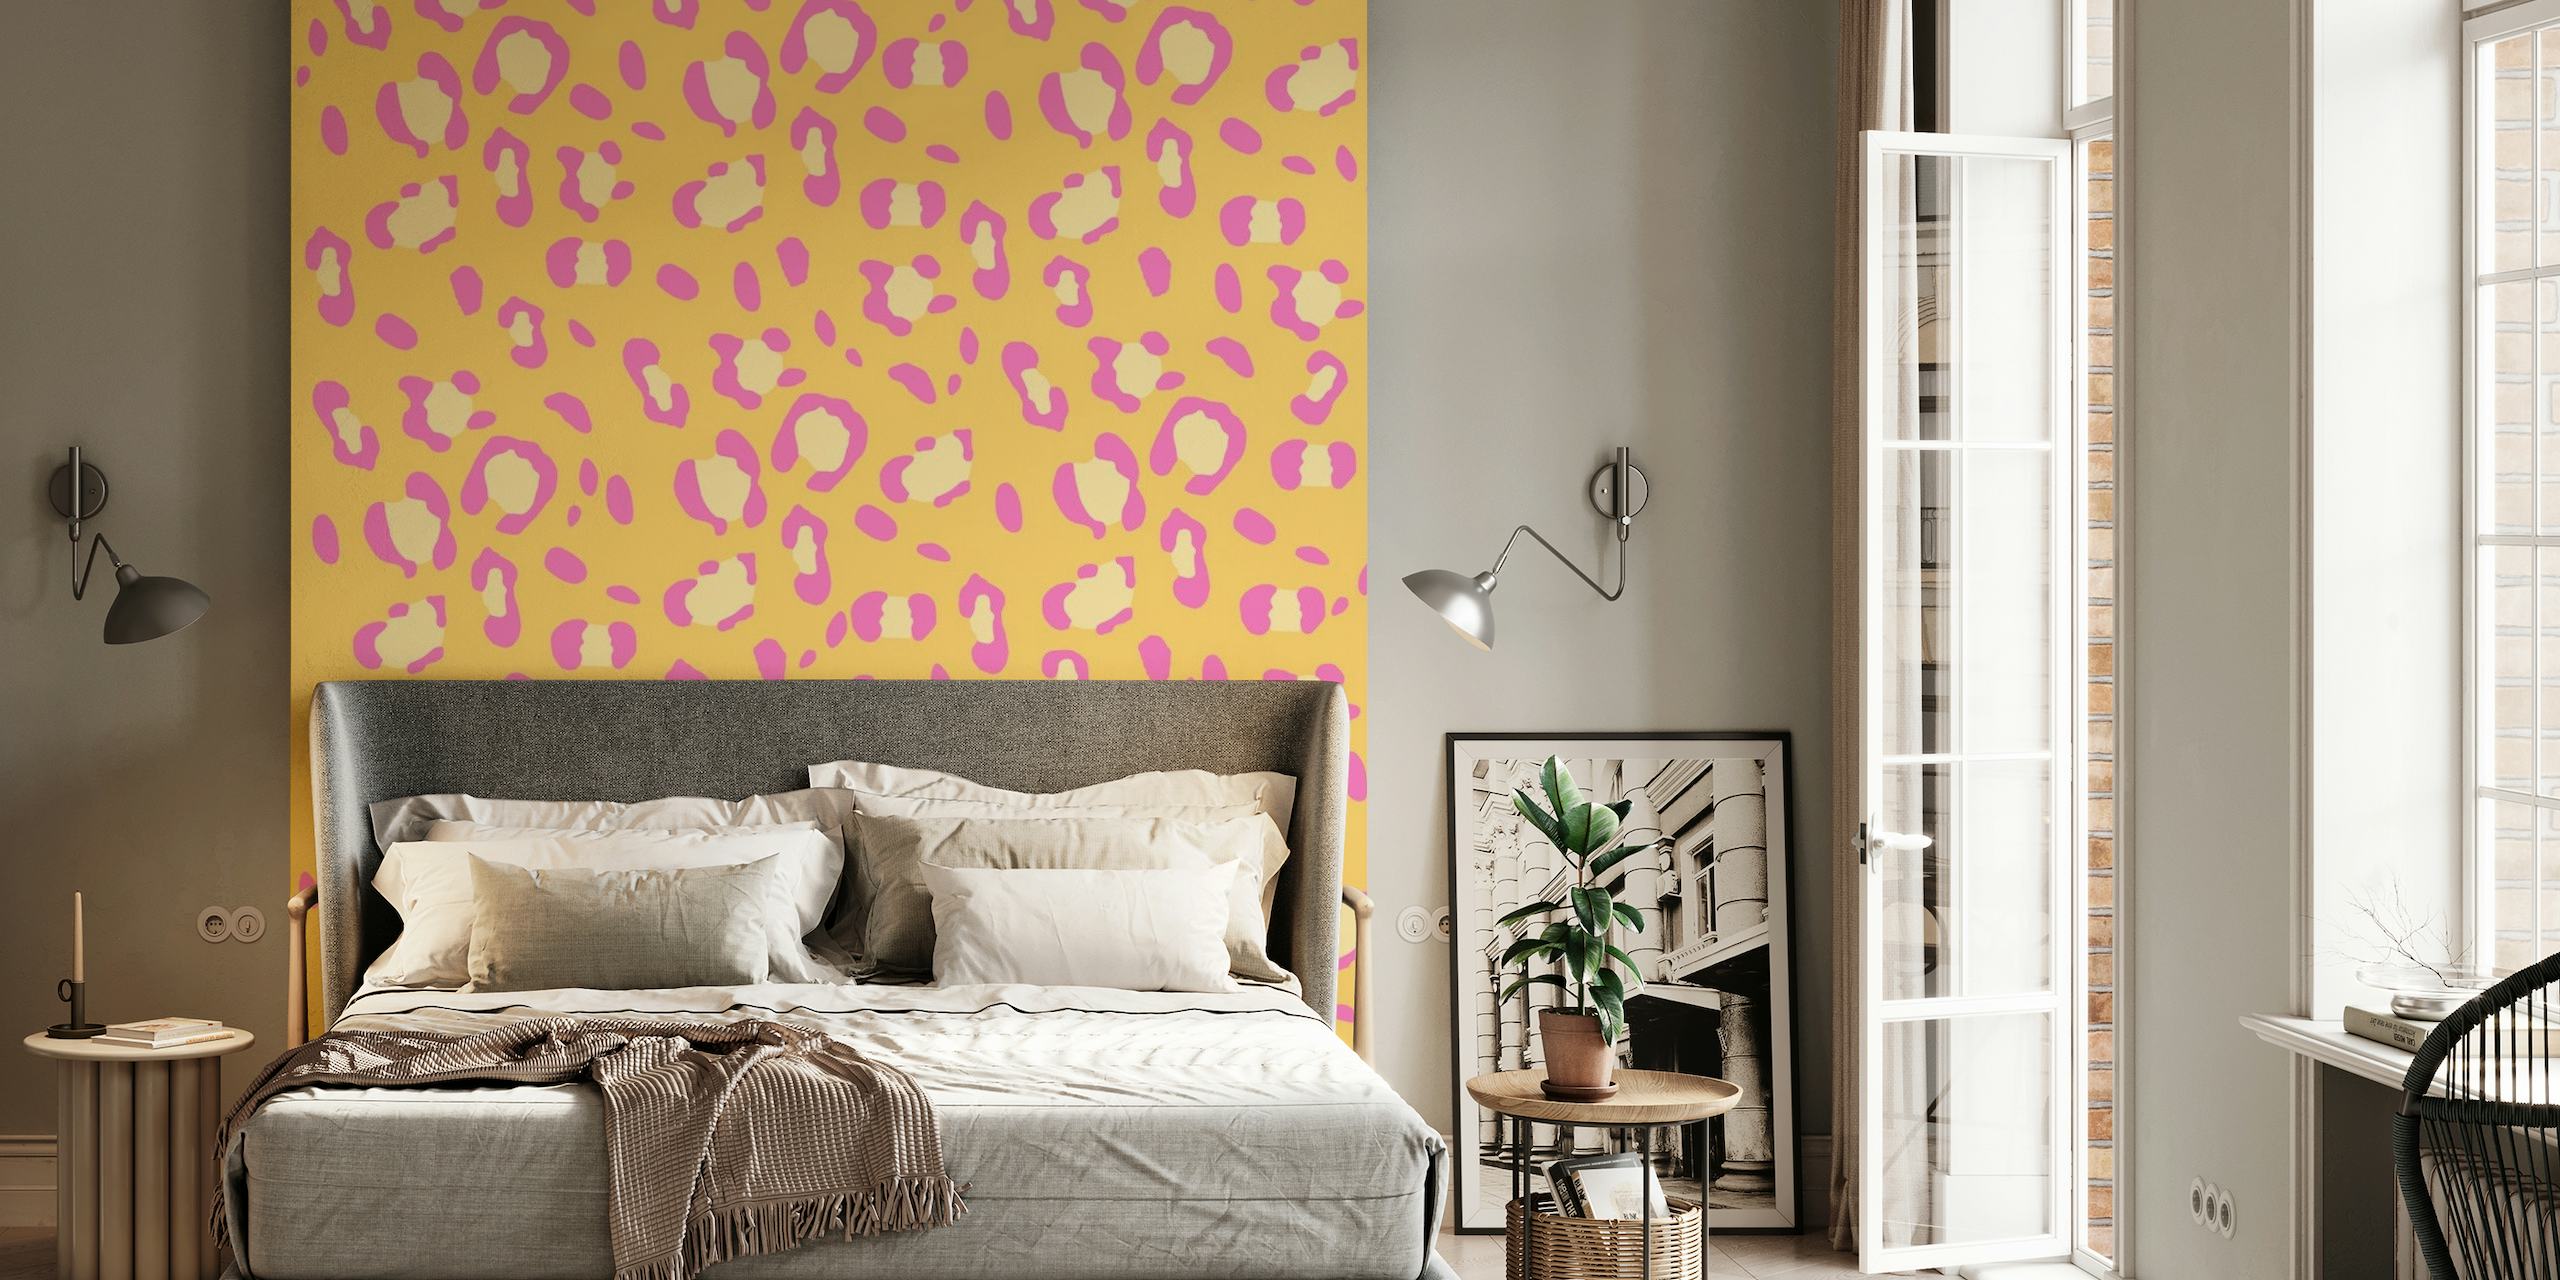 Leopard Animal Print Glam 34 wall mural with pink background